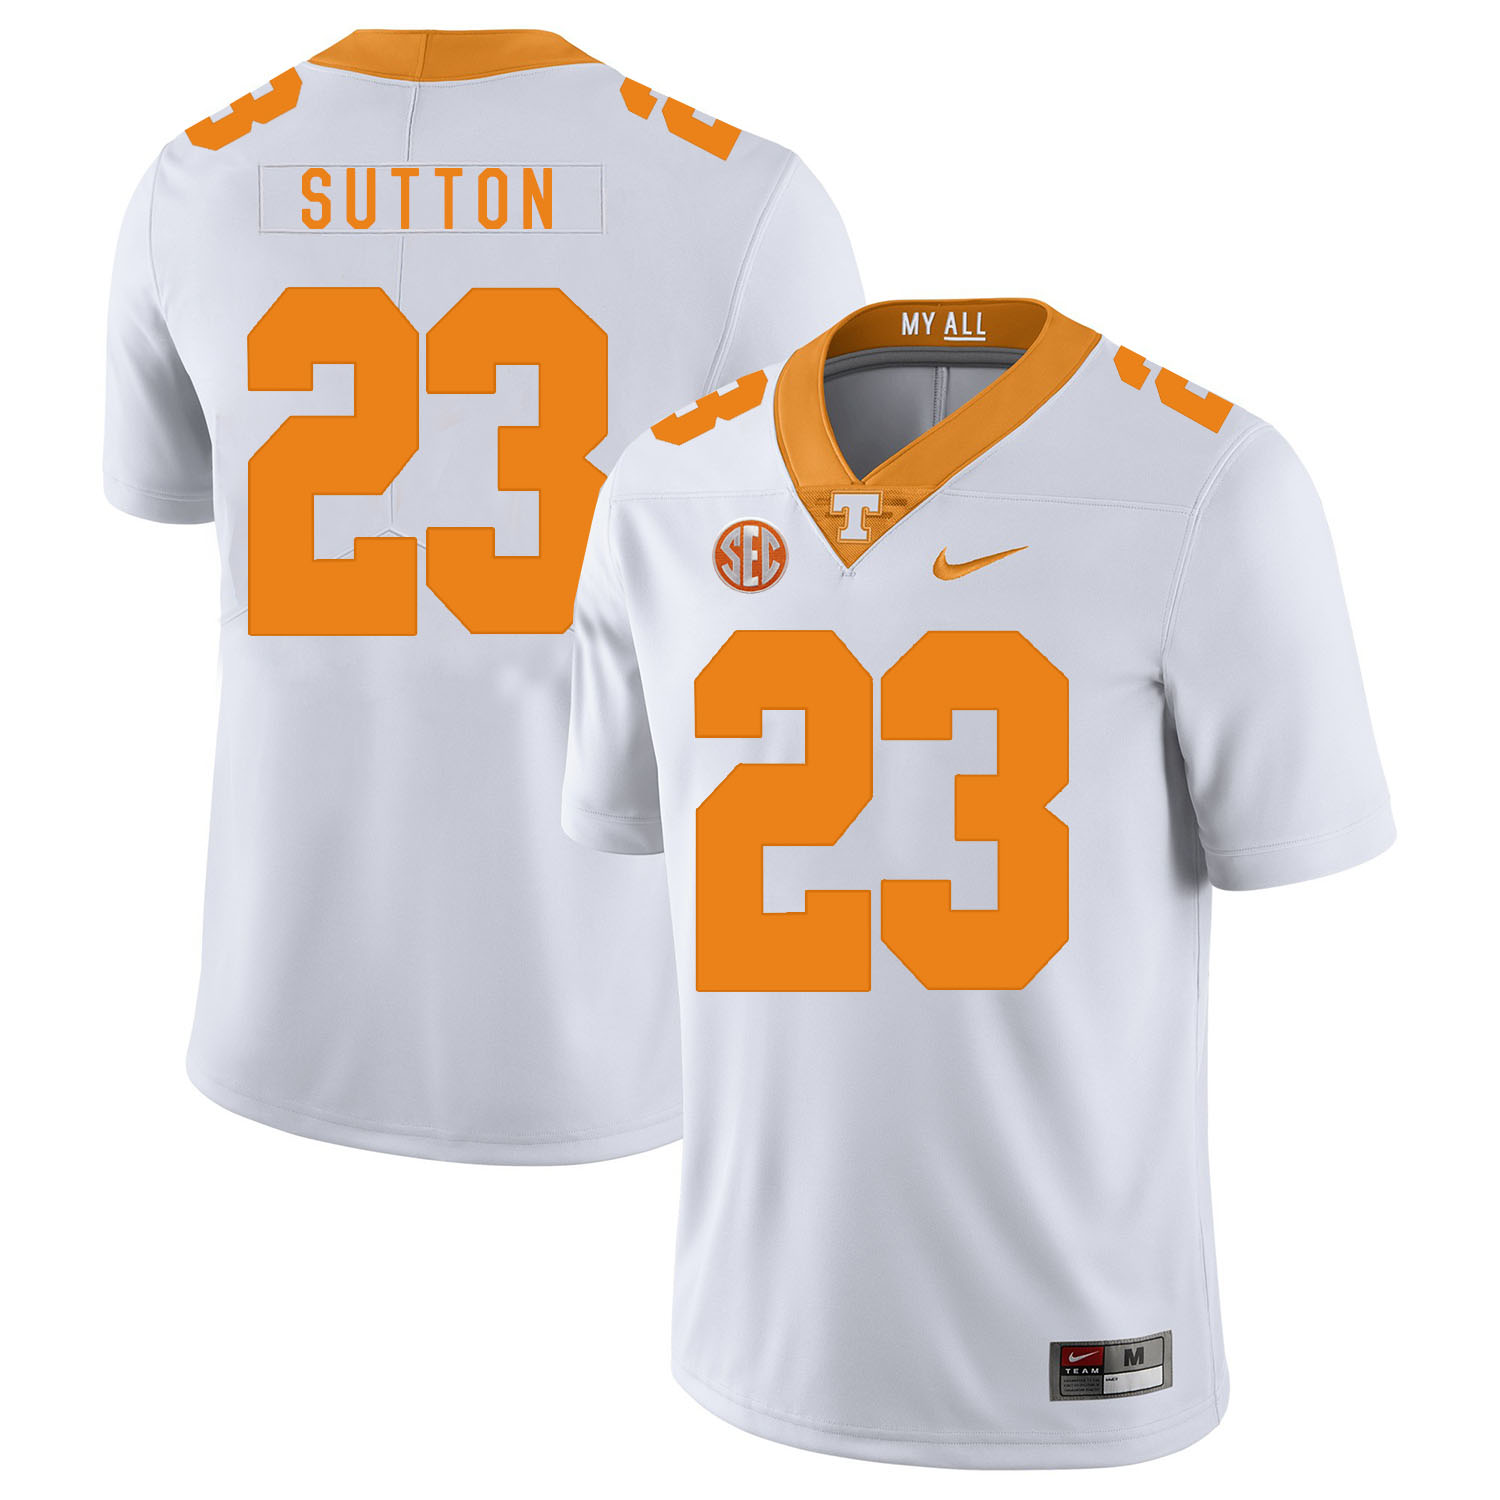 Tennessee Volunteers 23 Cameron Sutton White Nike College Football Jersey